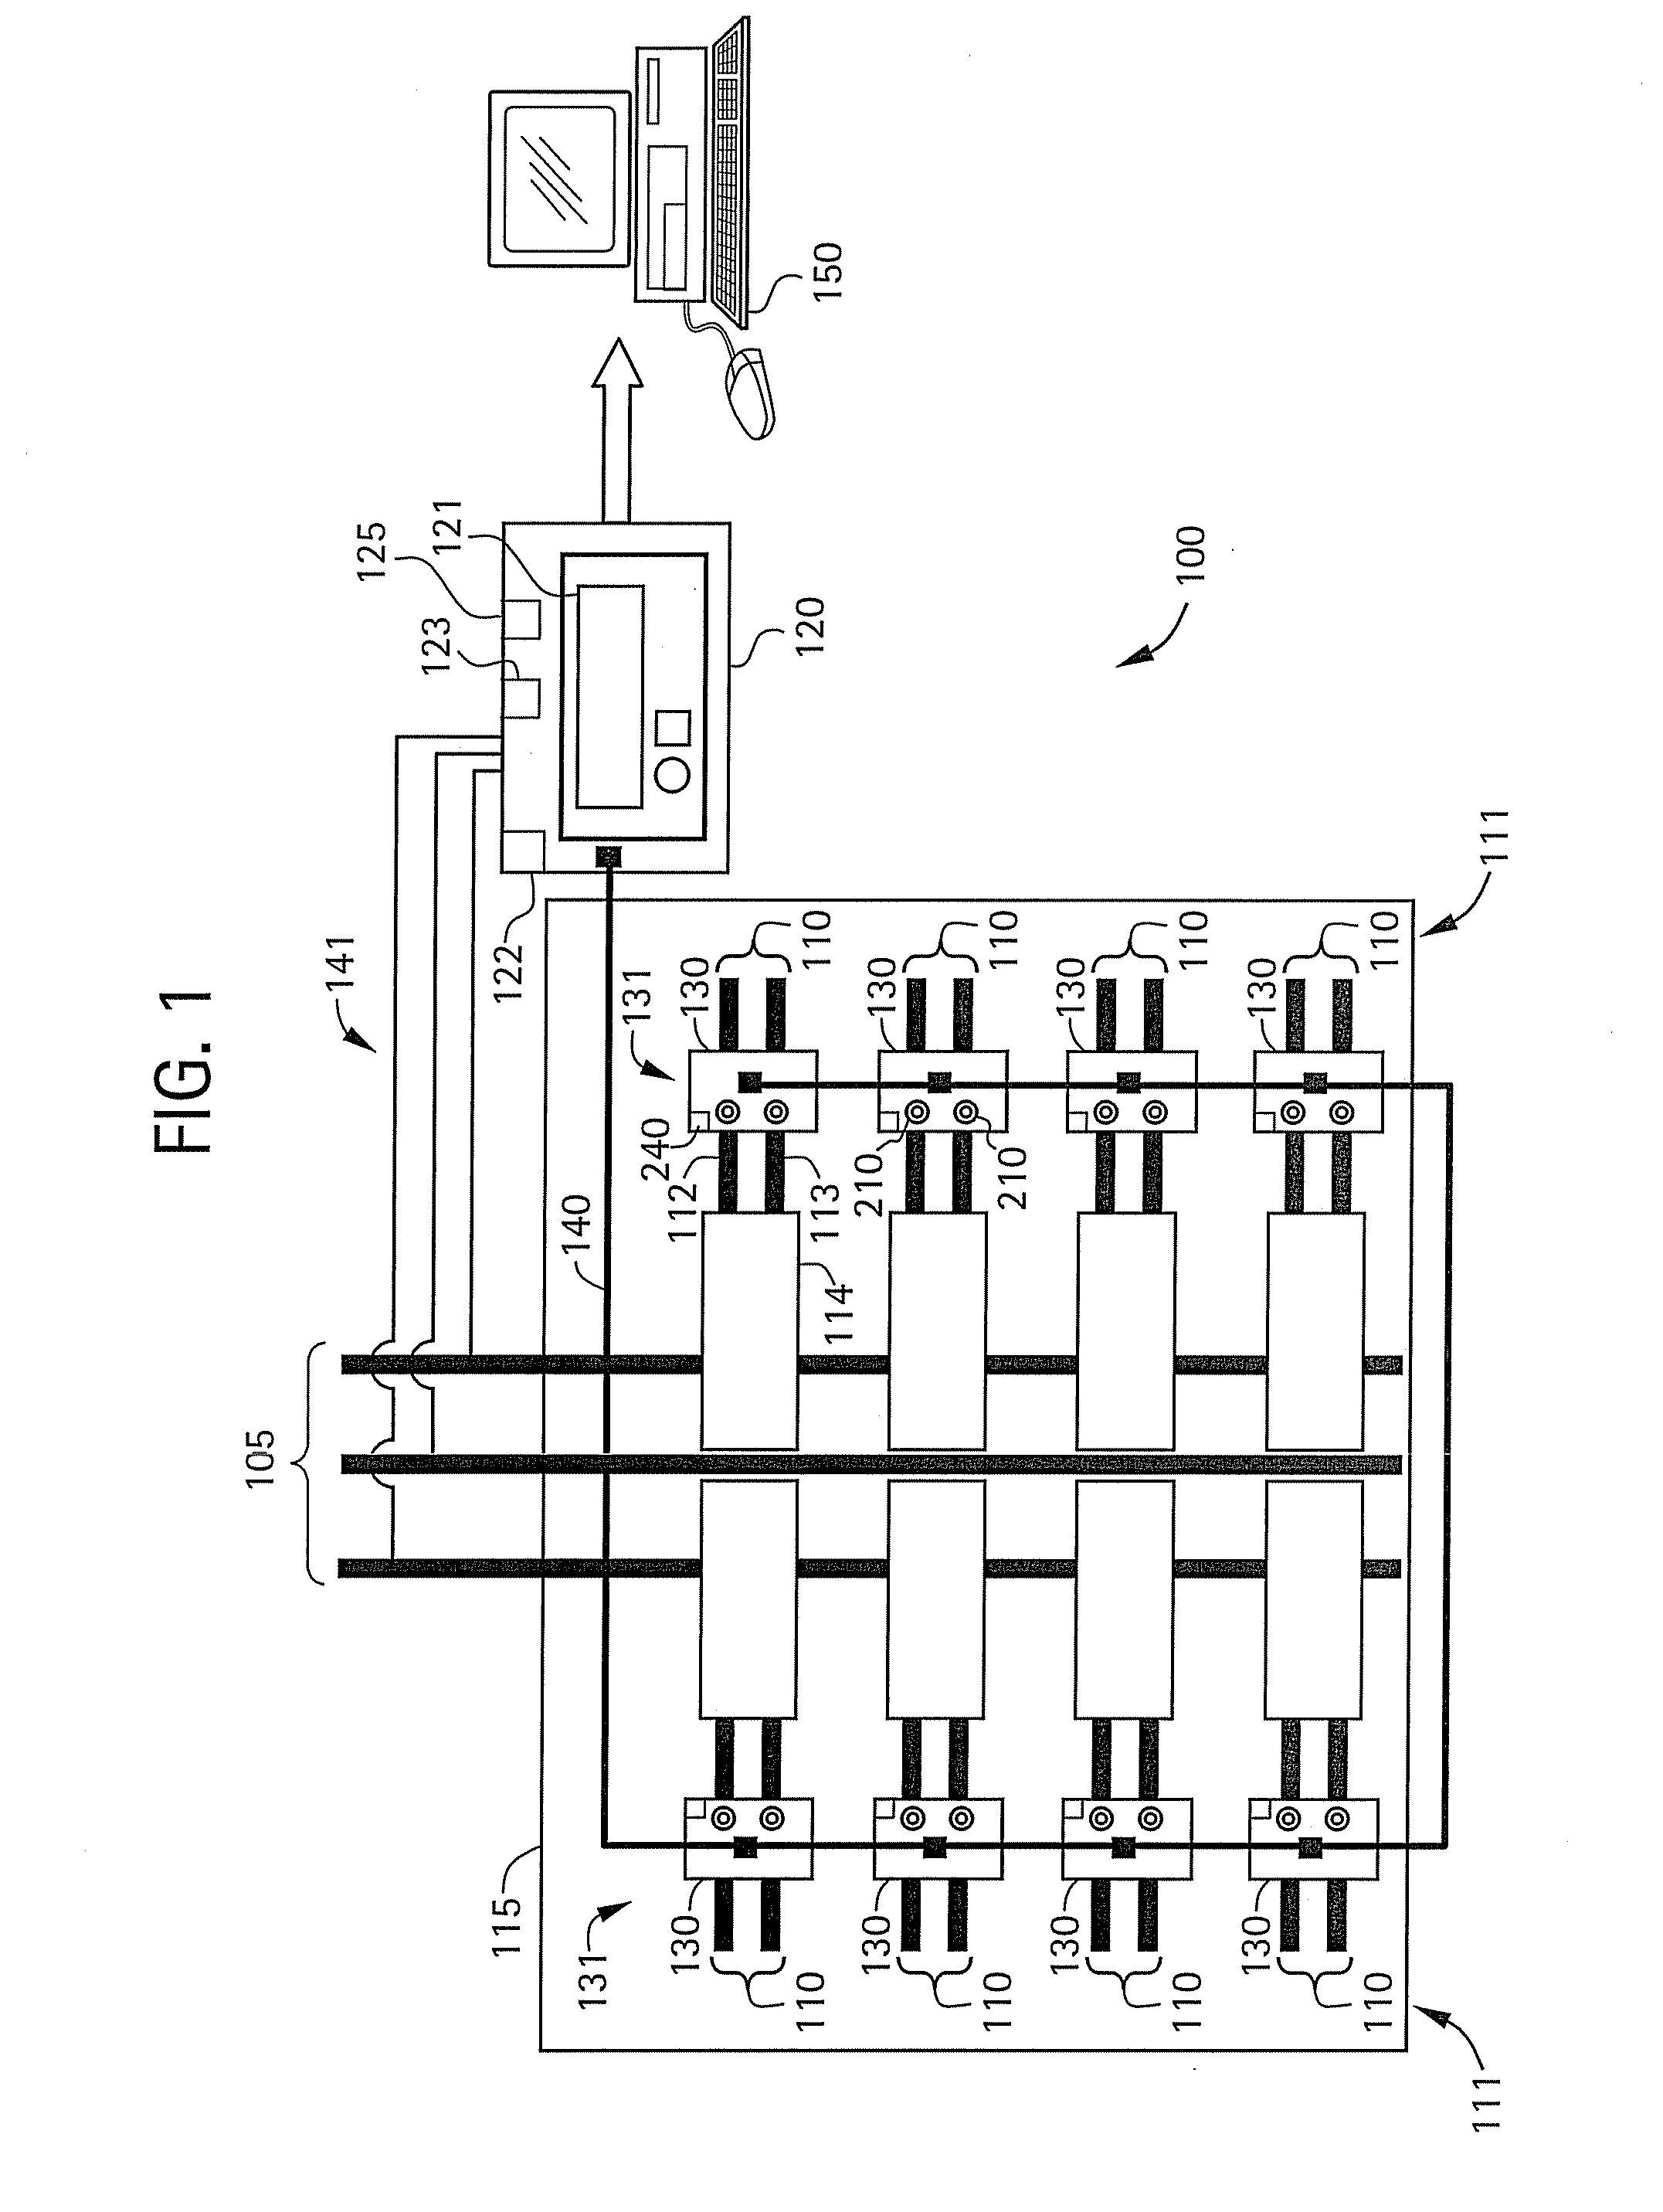 Current Sensing Module and Assembly Method Thereof